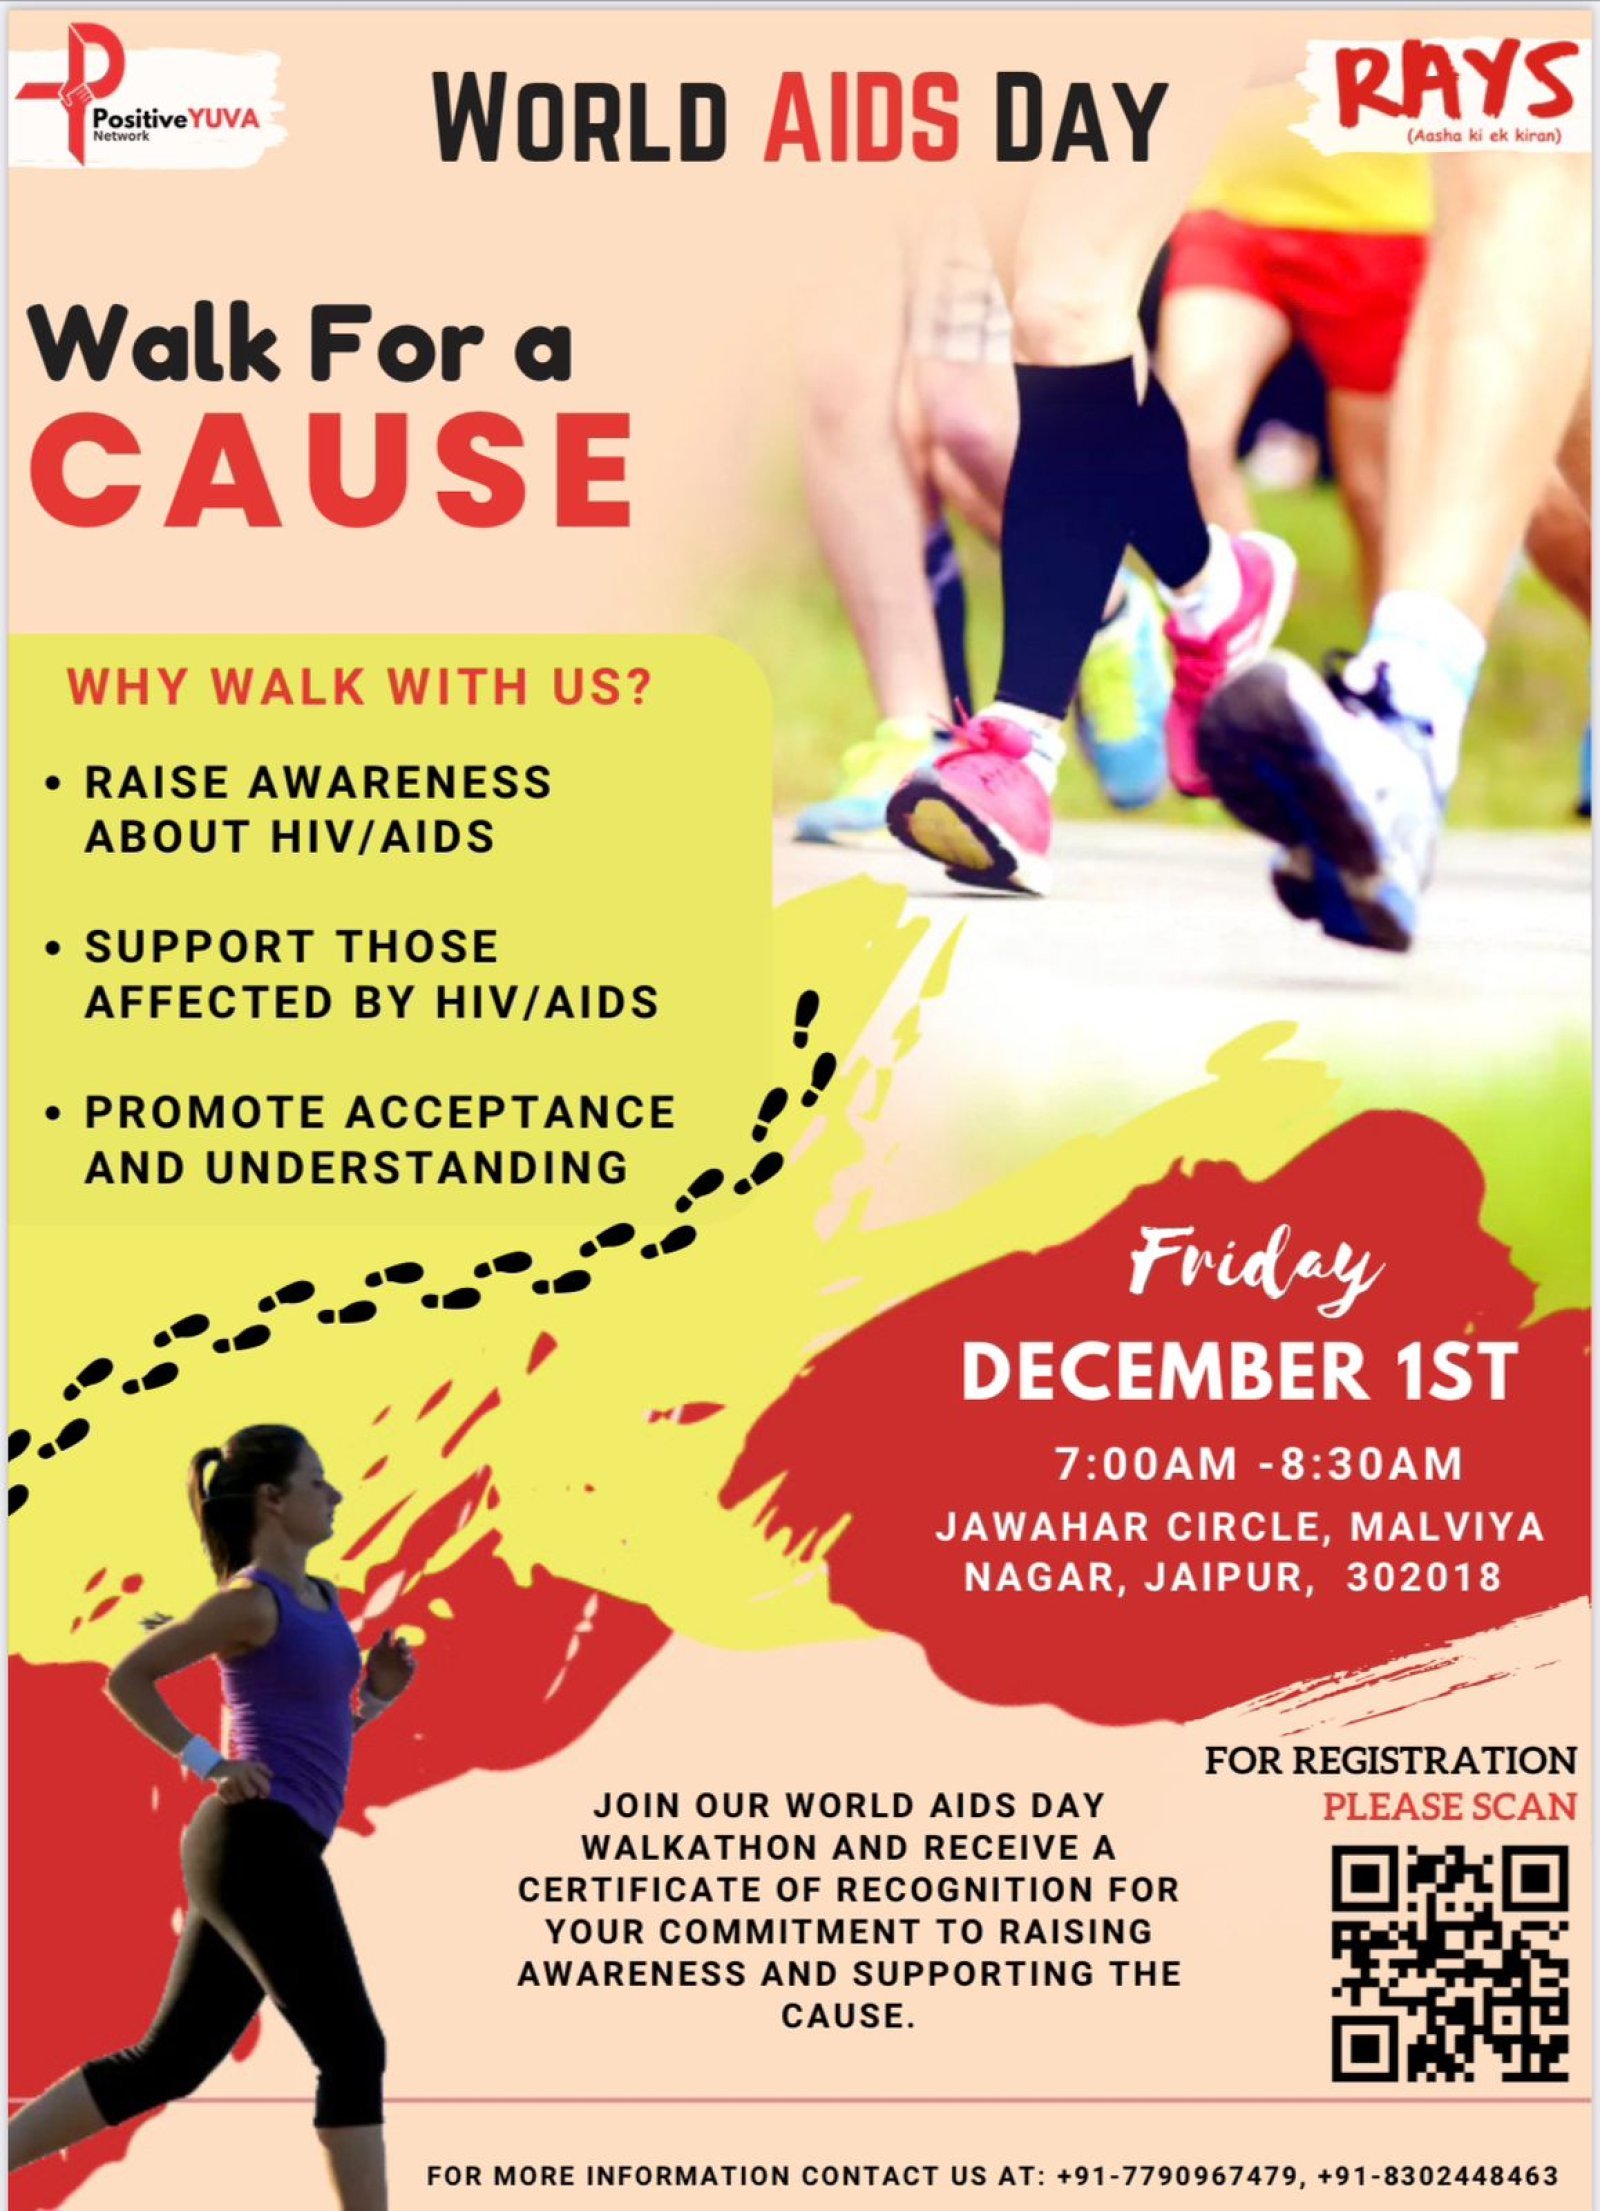 WALKATHON ON 1 DECEMBER TO SPREAD AWARENESS ABOUT HIV AND AIDS